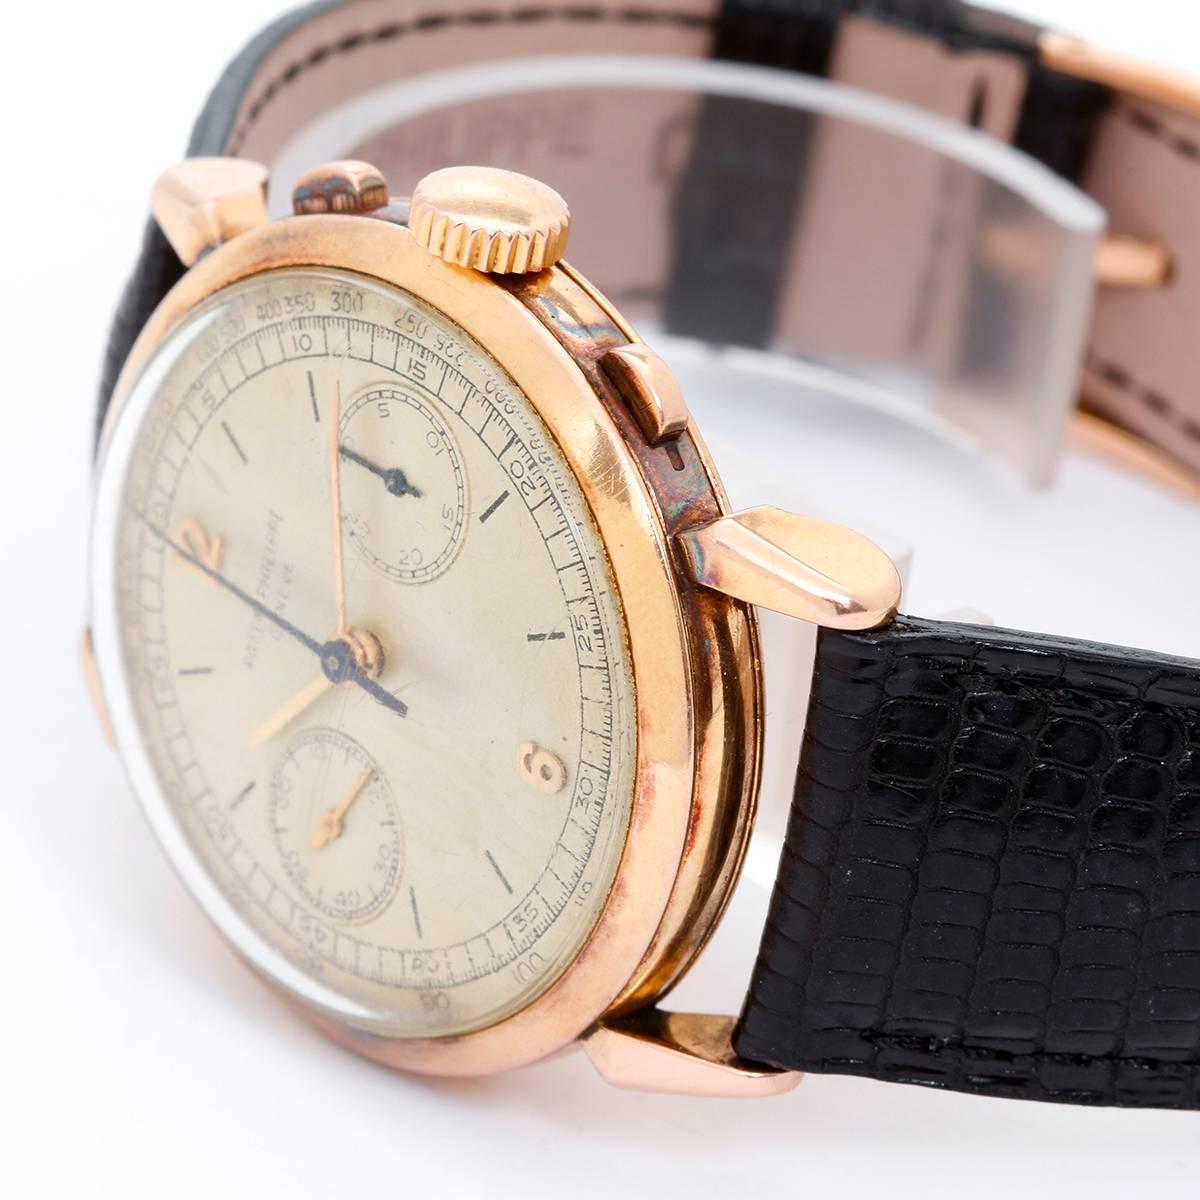 Vintage Patek Philippe & Co. Chronograph Men's Watch Ref 1579 -  Manual winding. Rose gold ( 36 mm ). Silvered dial with stick markers and Arabic numerals, railway Arabic five minute divisions, outer tachymetre scale, two subsidiary dials. Patek